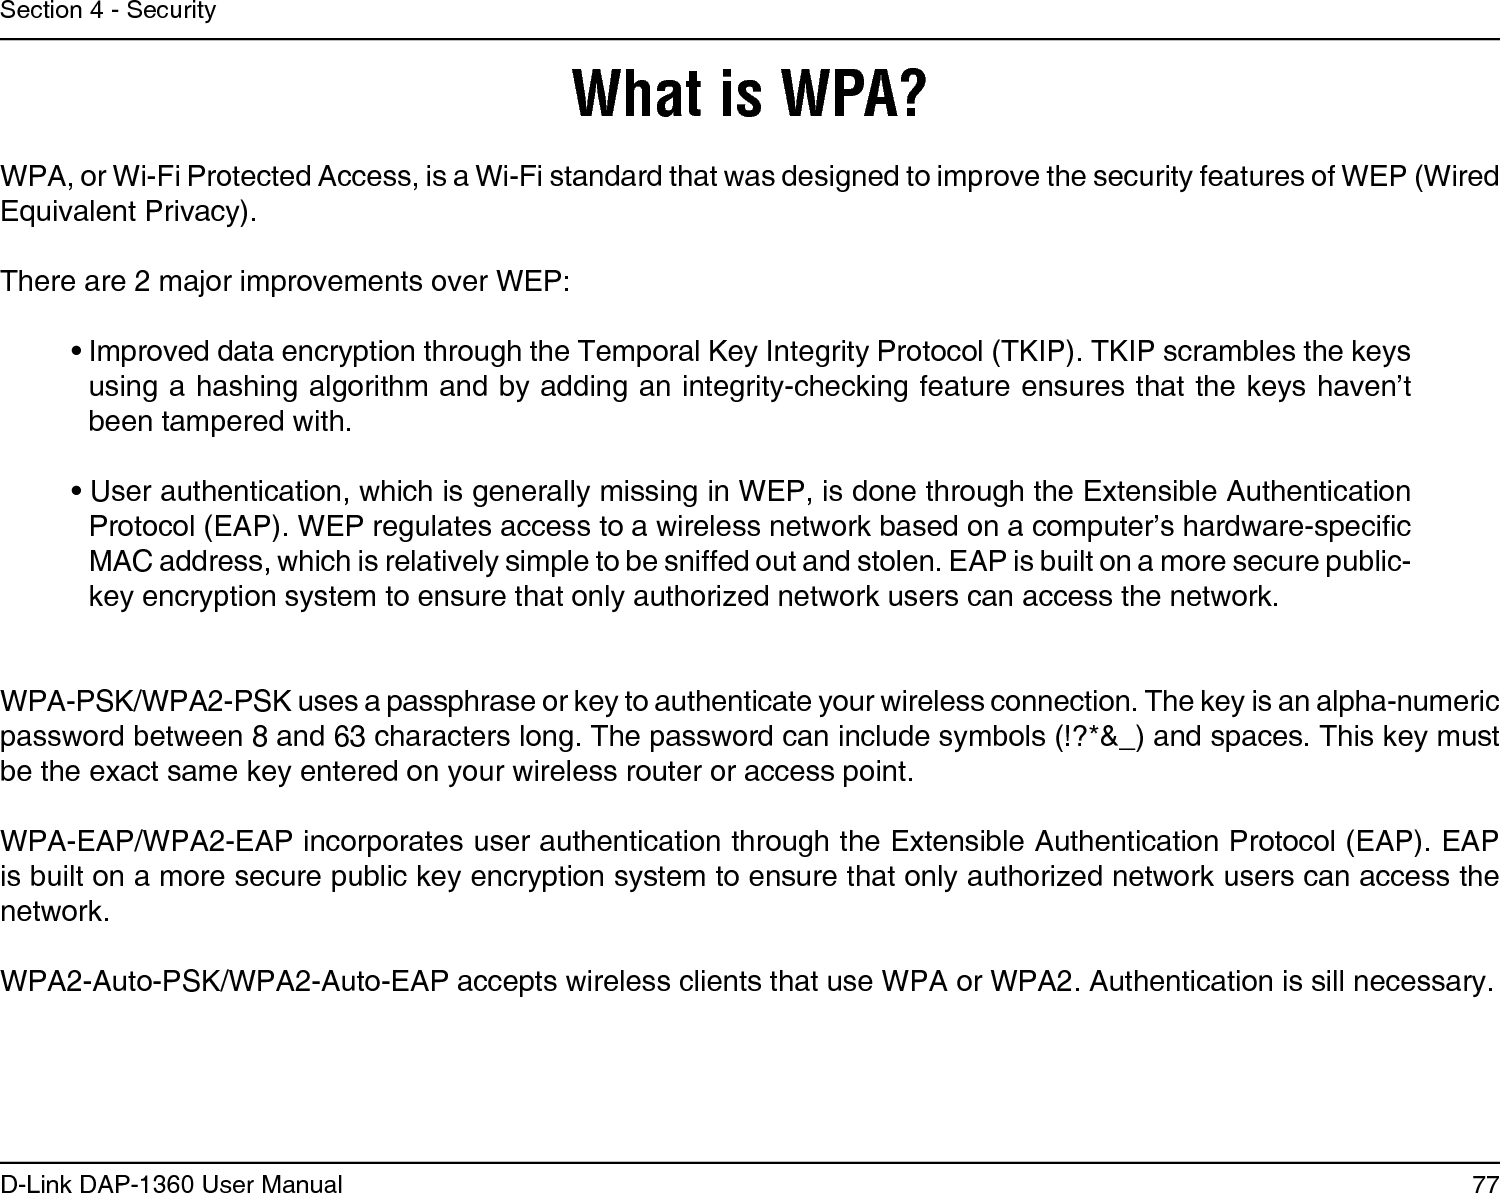 77D-Link DAP-1360 User ManualSection 4 - SecurityWhat is WPA?WPA, or Wi-Fi Protected Access, is a Wi-Fi standard that was designed to improve the security features of WEP (Wired Equivalent Privacy).  There are 2 major improvements over WEP: • Improved data encryption through the Temporal Key Integrity Protocol (TKIP). TKIP scrambles the keys using a hashing algorithm and by adding an integrity-checking feature ensures that the keys haven’t been tampered with. • User authentication, which is generally missing in WEP, is done through the Extensible Authentication Protocol (EAP). WEP regulates access to a wireless network based on a computer’s hardware-specic MAC address, which is relatively simple to be sniffed out and stolen. EAP is built on a more secure public-key encryption system to ensure that only authorized network users can access the network.WPA-PSK/WPA2-PSK uses a passphrase or key to authenticate your wireless connection. The key is an alpha-numeric password between 8 and 63 characters long. The password can include symbols (!?*&amp;_) and spaces. This key must be the exact same key entered on your wireless router or access point.WPA-EAP/WPA2-EAP incorporates user authentication through the Extensible Authentication Protocol (EAP). EAP is built on a more secure public key encryption system to ensure that only authorized network users can access the network.WPA2-Auto-PSK/WPA2-Auto-EAP accepts wireless clients that use WPA or WPA2. Authentication is sill necessary.